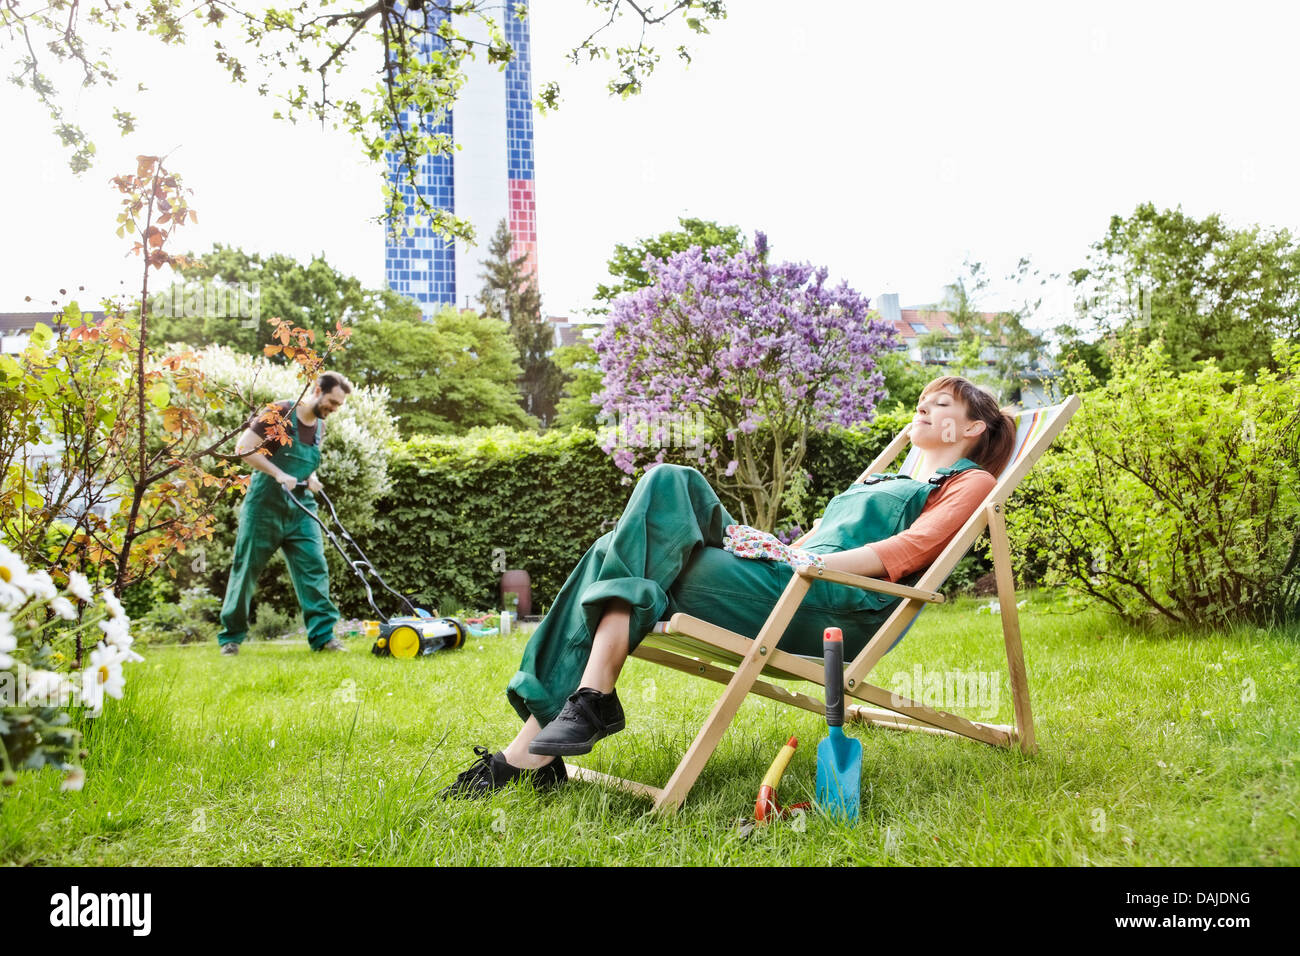 Germany, Cologne, Young woman relaxing on deck chair while man mowing lawn Stock Photo